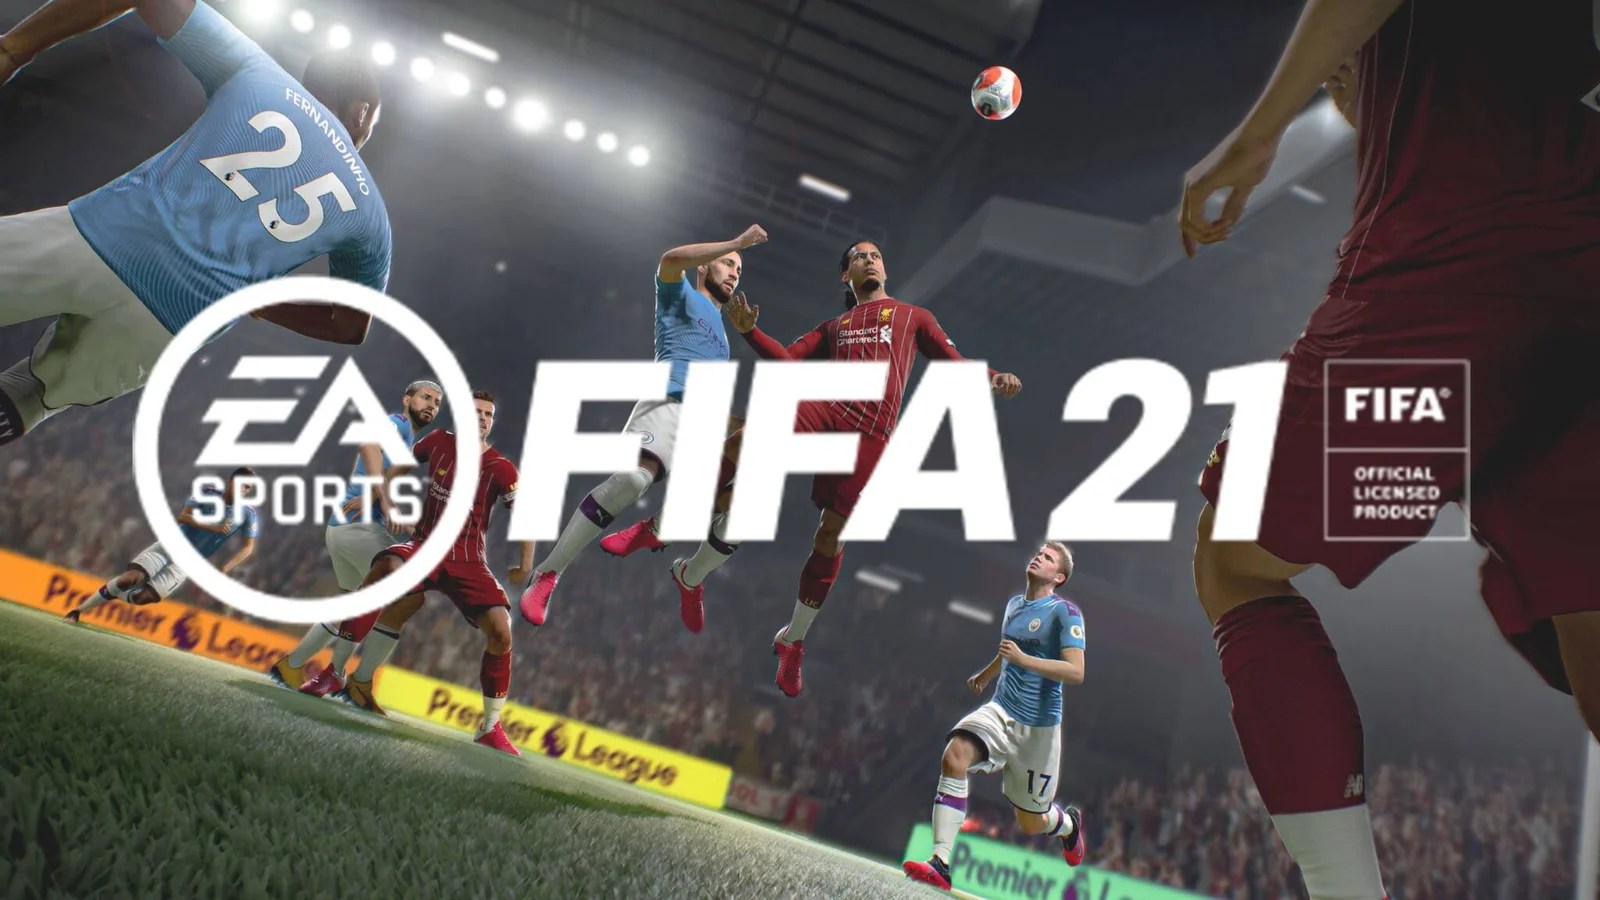 FIFA 21 PS3 Full Games ISO + Patch Season 2021